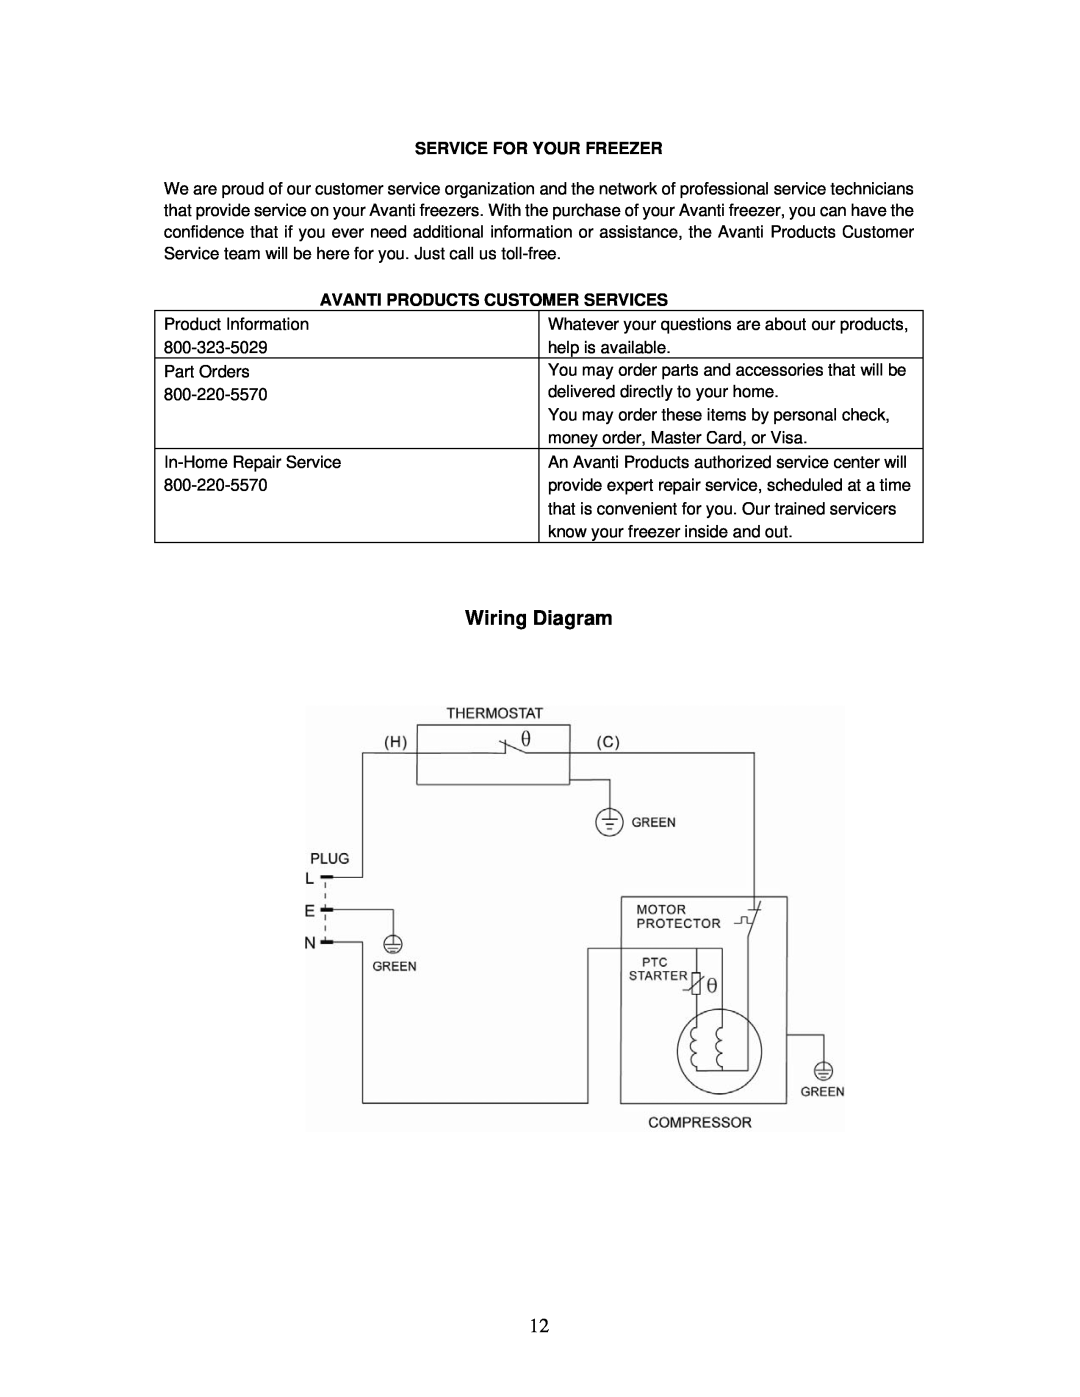 Avanti VM302W-1 instruction manual Wiring Diagram, Service For Your Freezer, Avanti Products Customer Services 